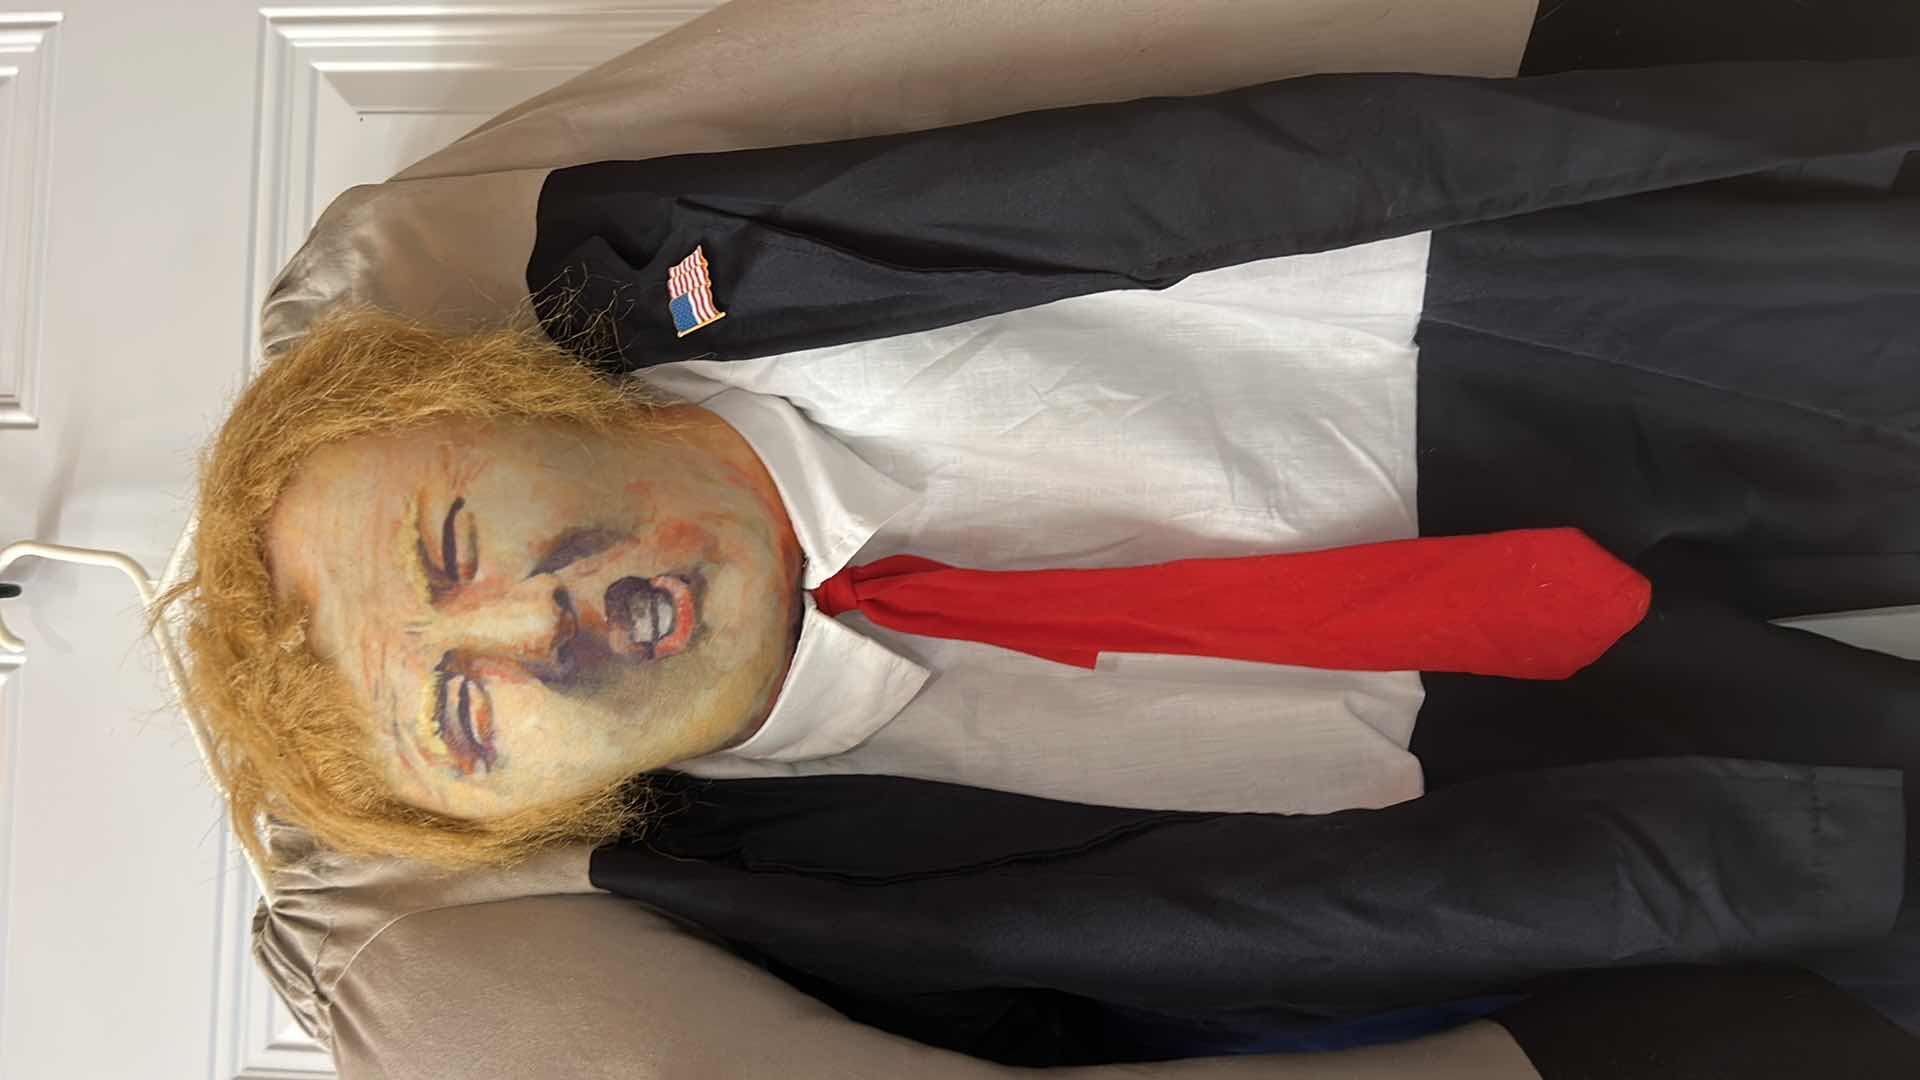 Photo 2 of ADULT TRUMP COSTUME, RIDE ON TRUMPS SHOULDERS